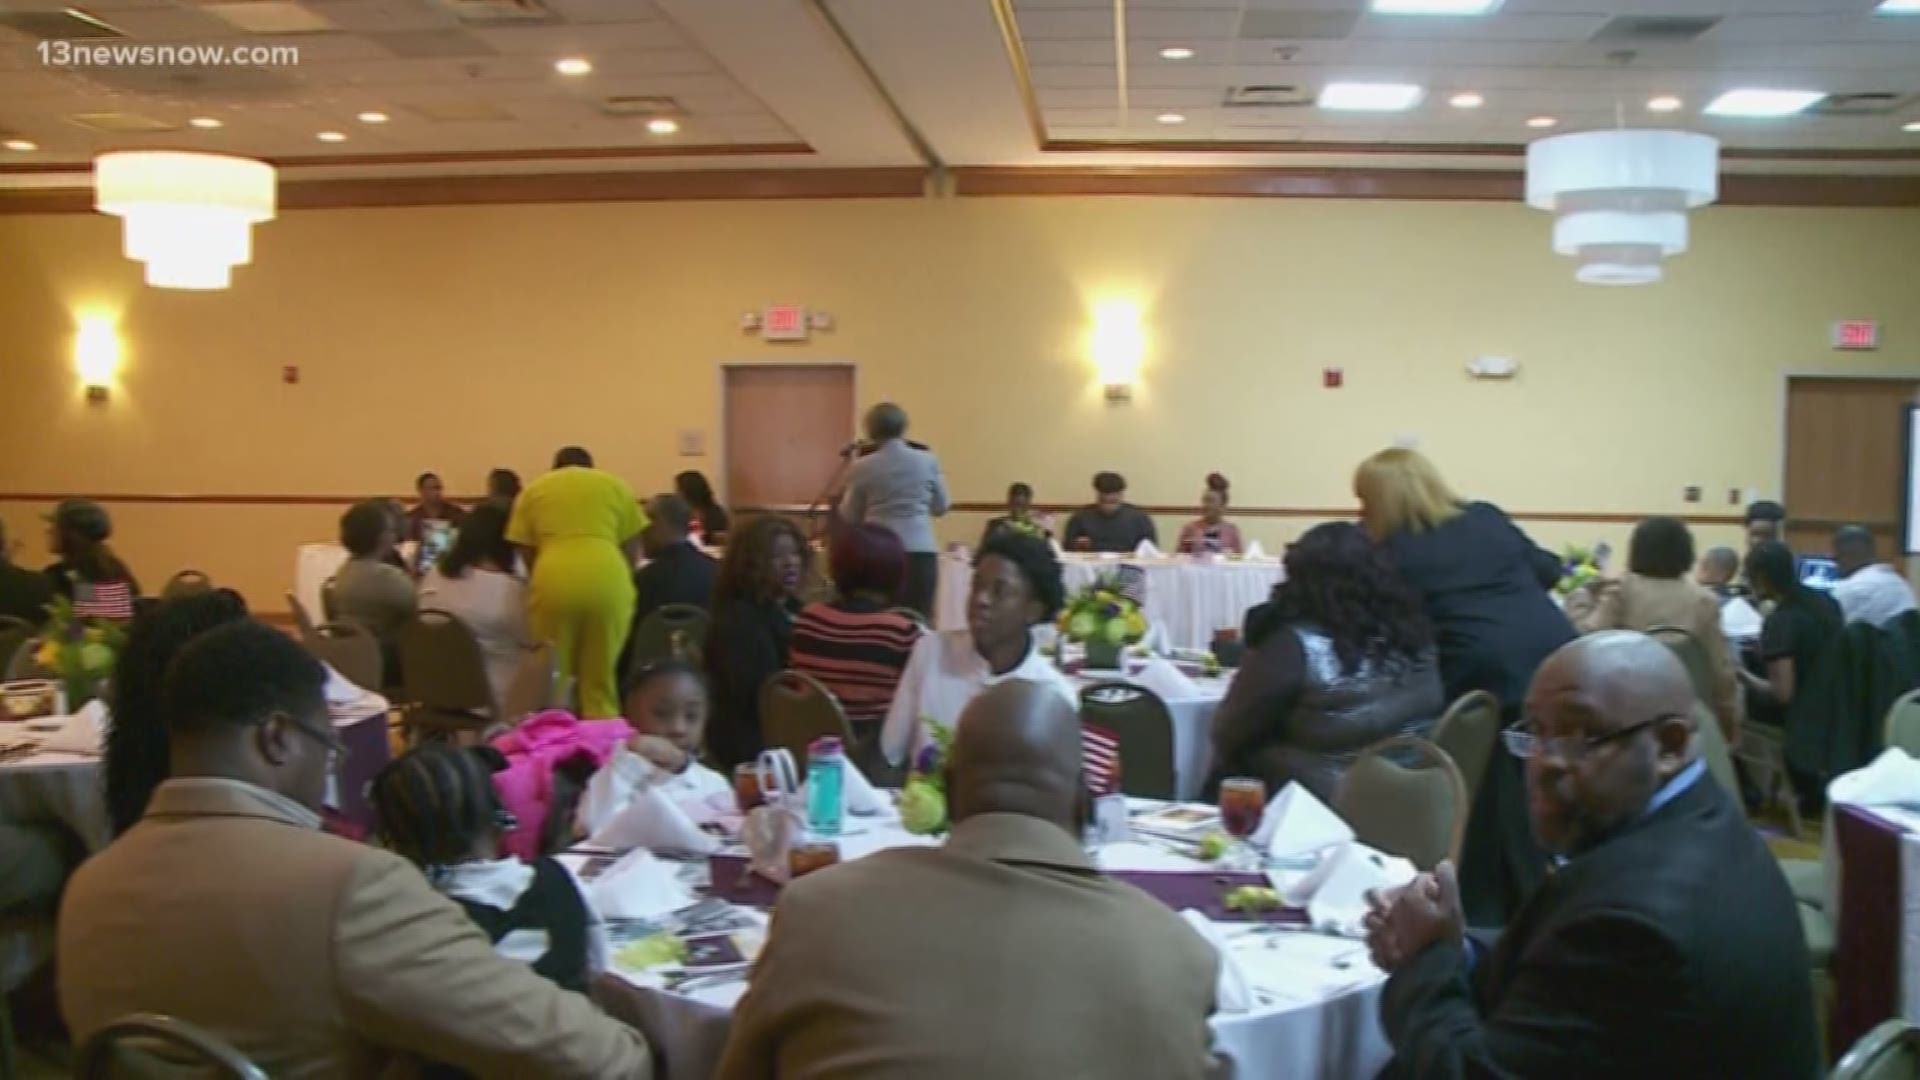 13News Now Janet Roach has more on the MLK Day brunch in Suffolk where organizers sought to raise scholarship money for high school seniors in the city.